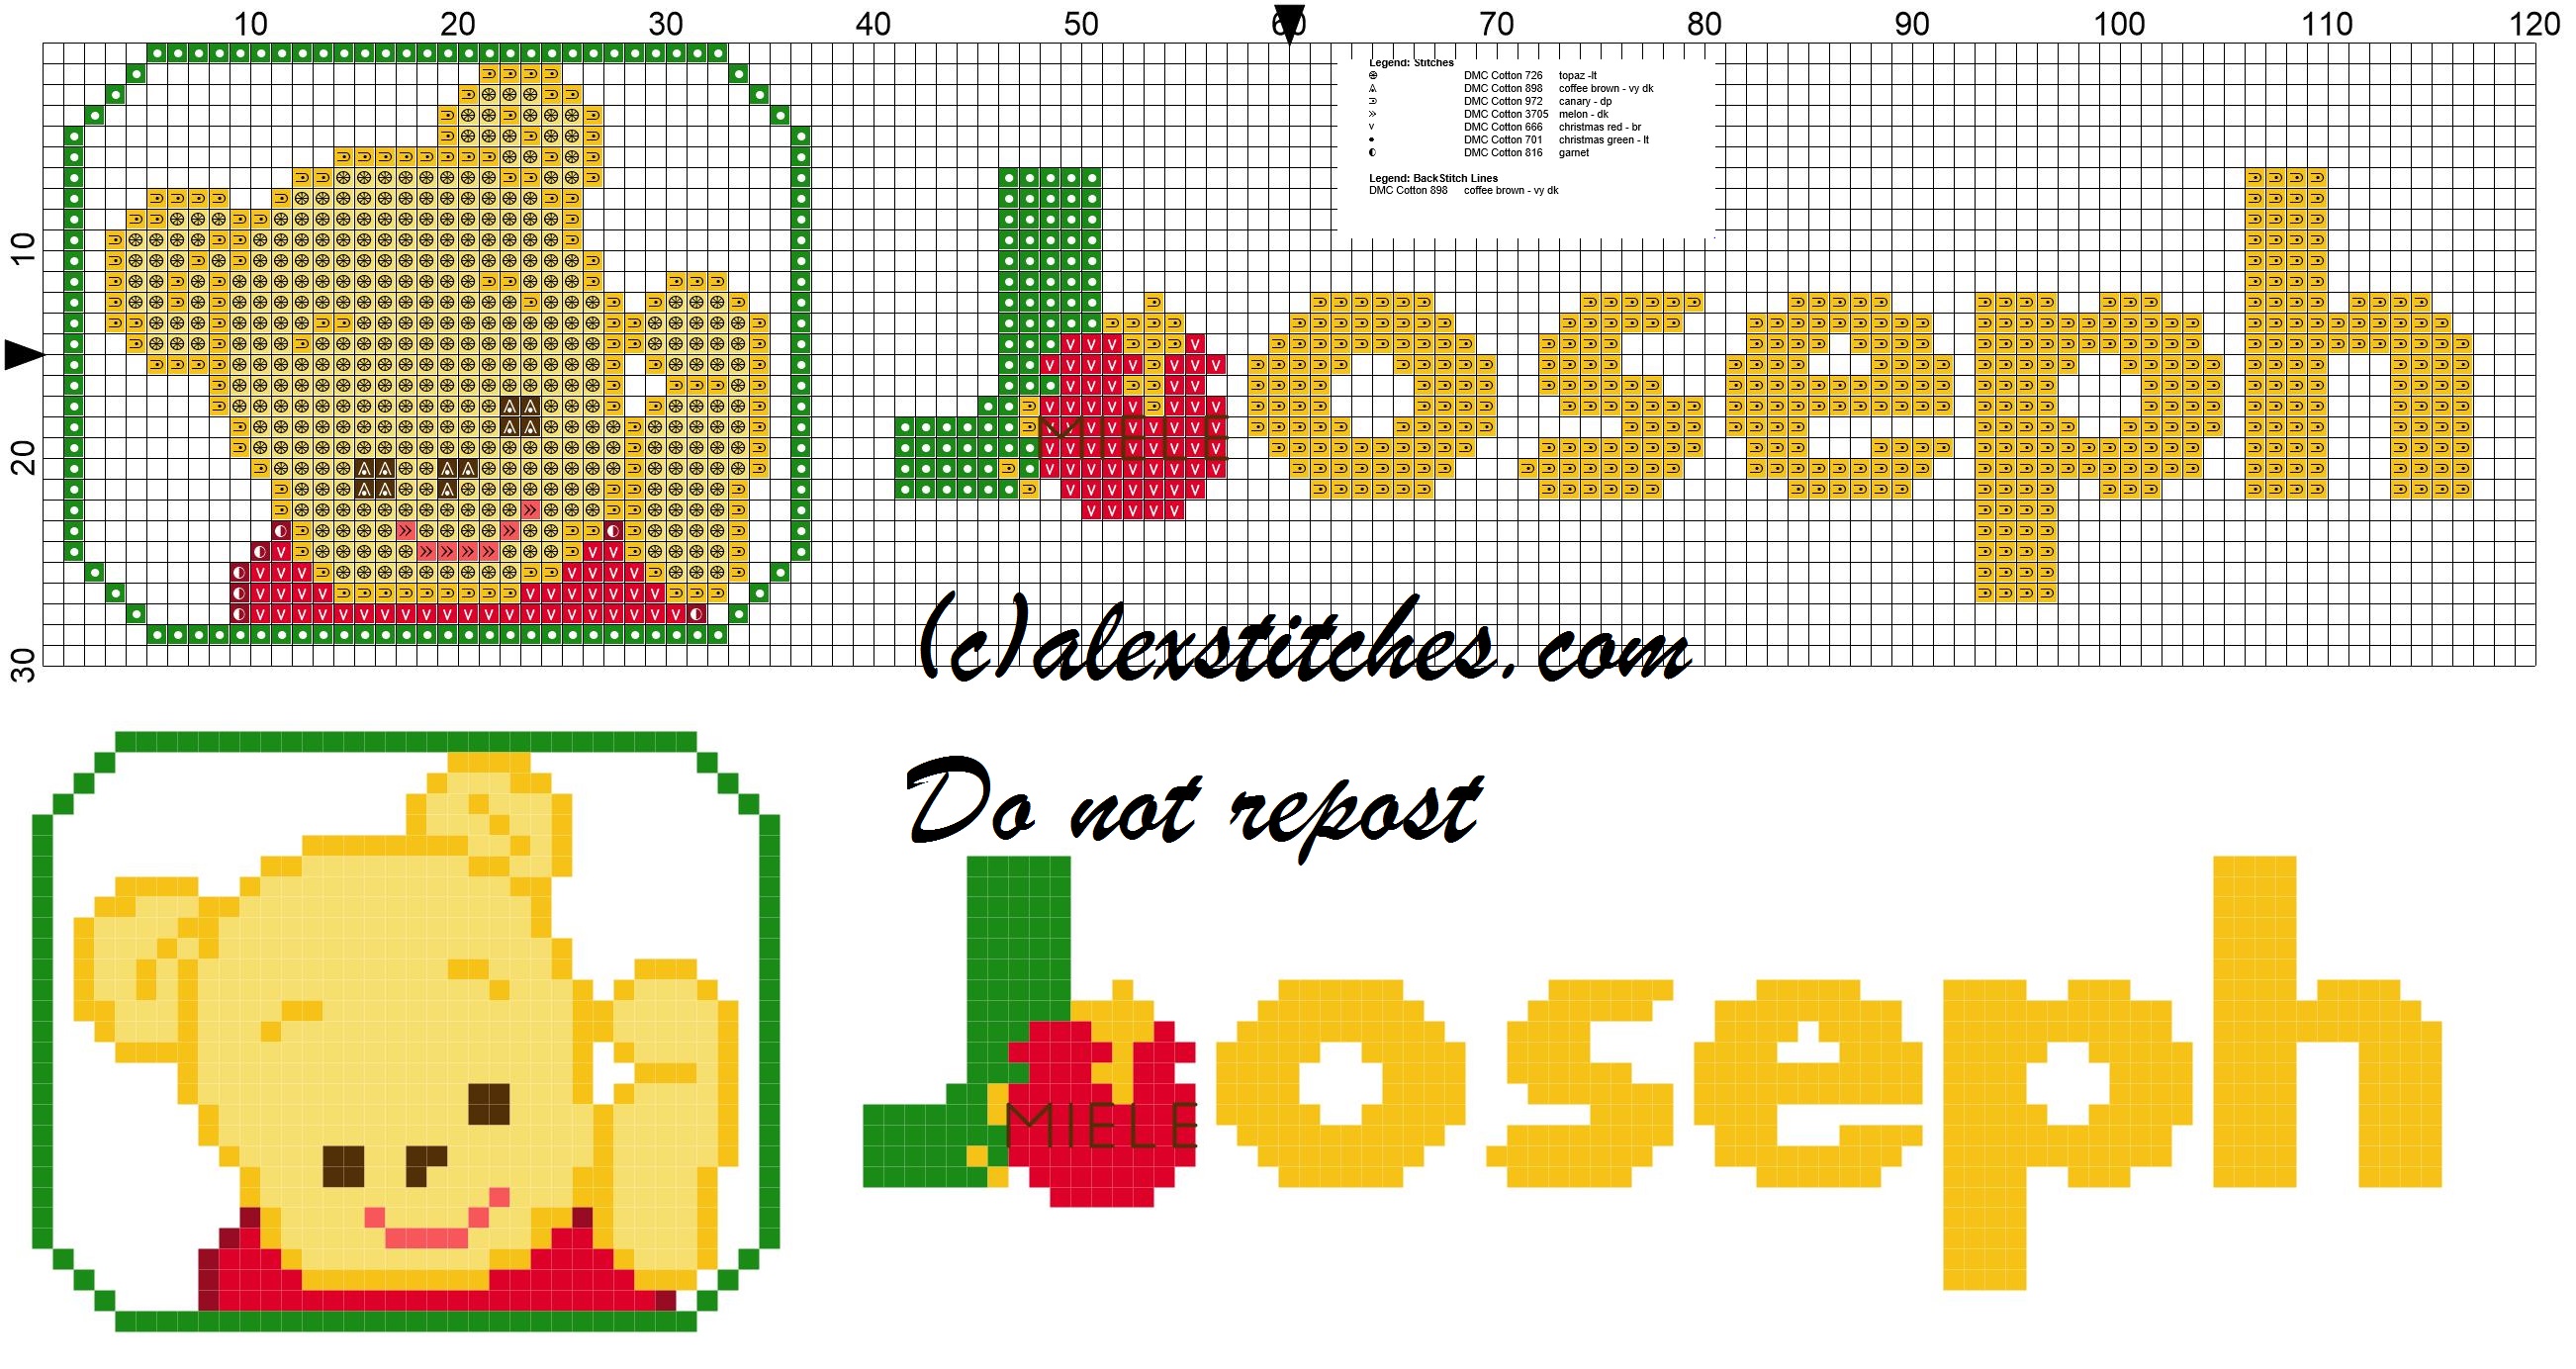 Joseph name with Baby winnie the pooh free cross stitches pattern